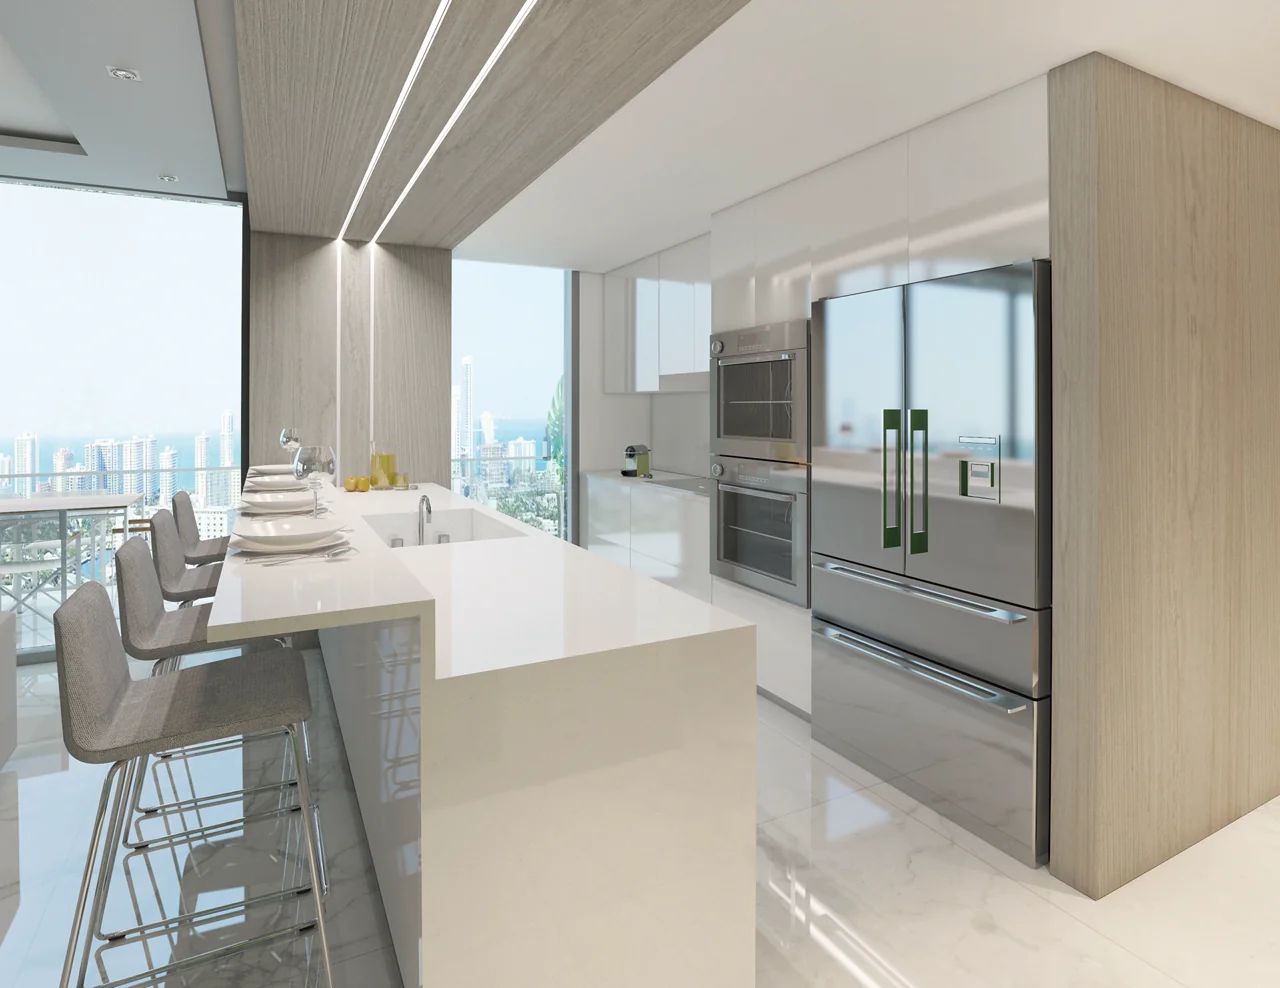 Modern Kitchen with Italian Imported Cabinetry and Premium Countertops in Oasis Hallandale's High-End Residence